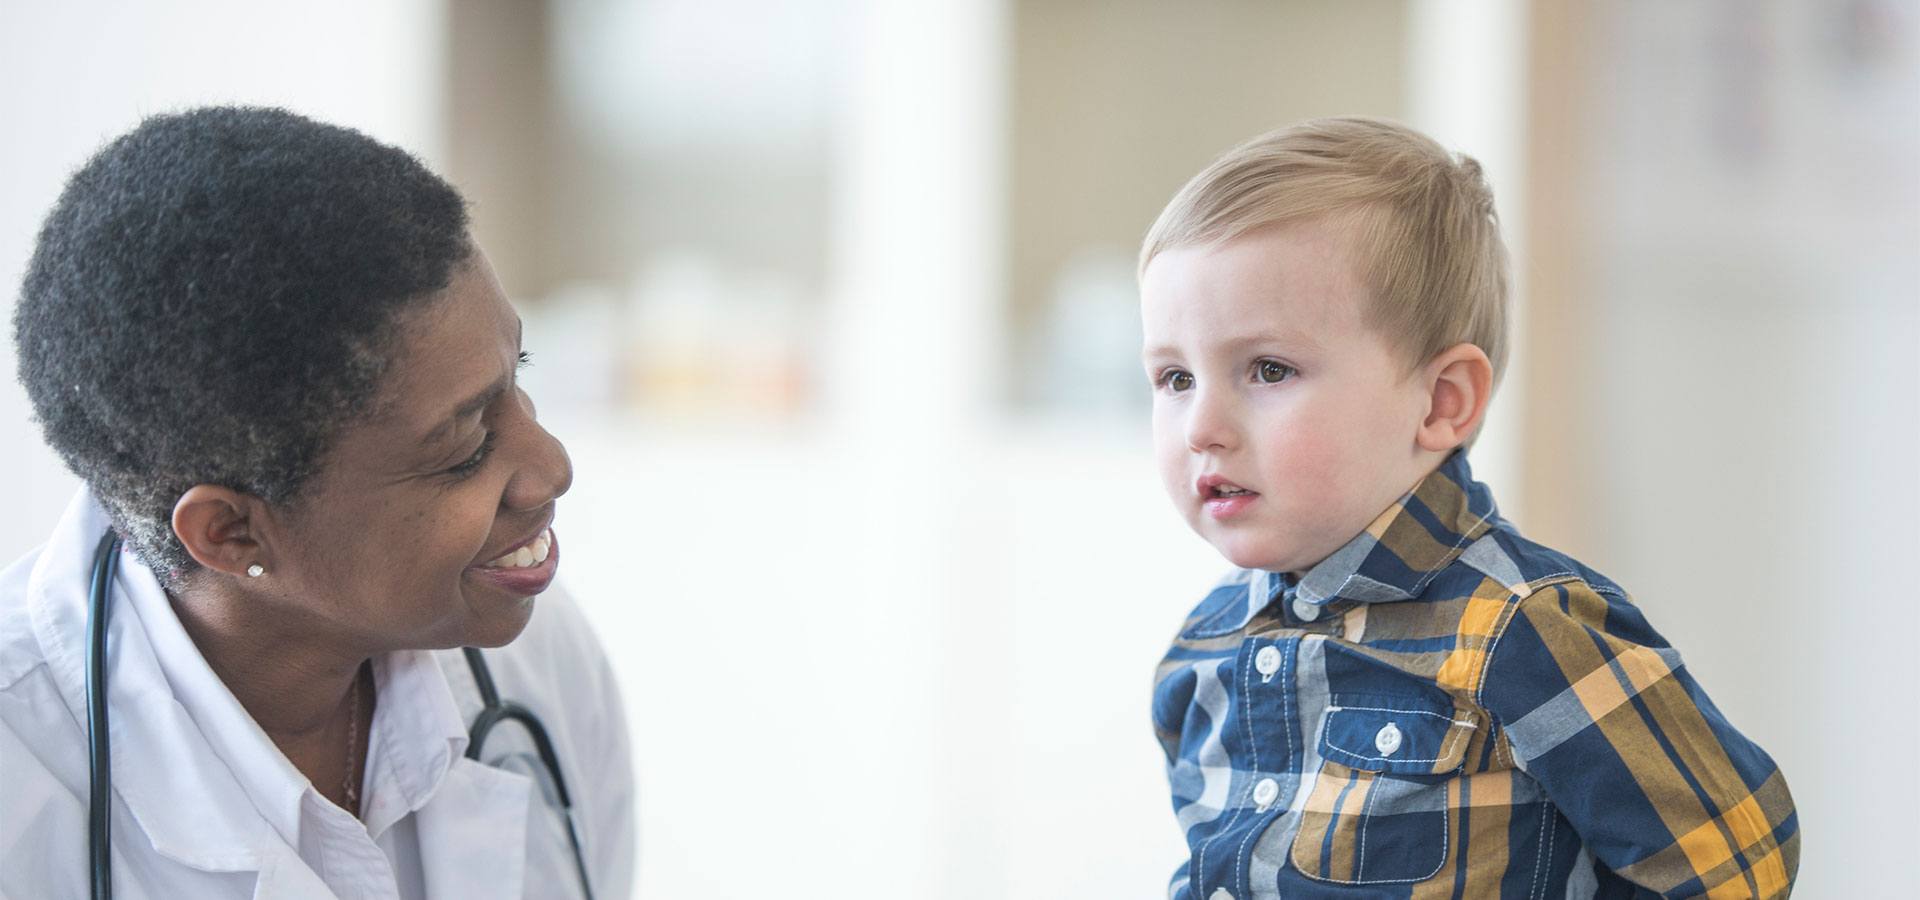 Image of doctor with toddler